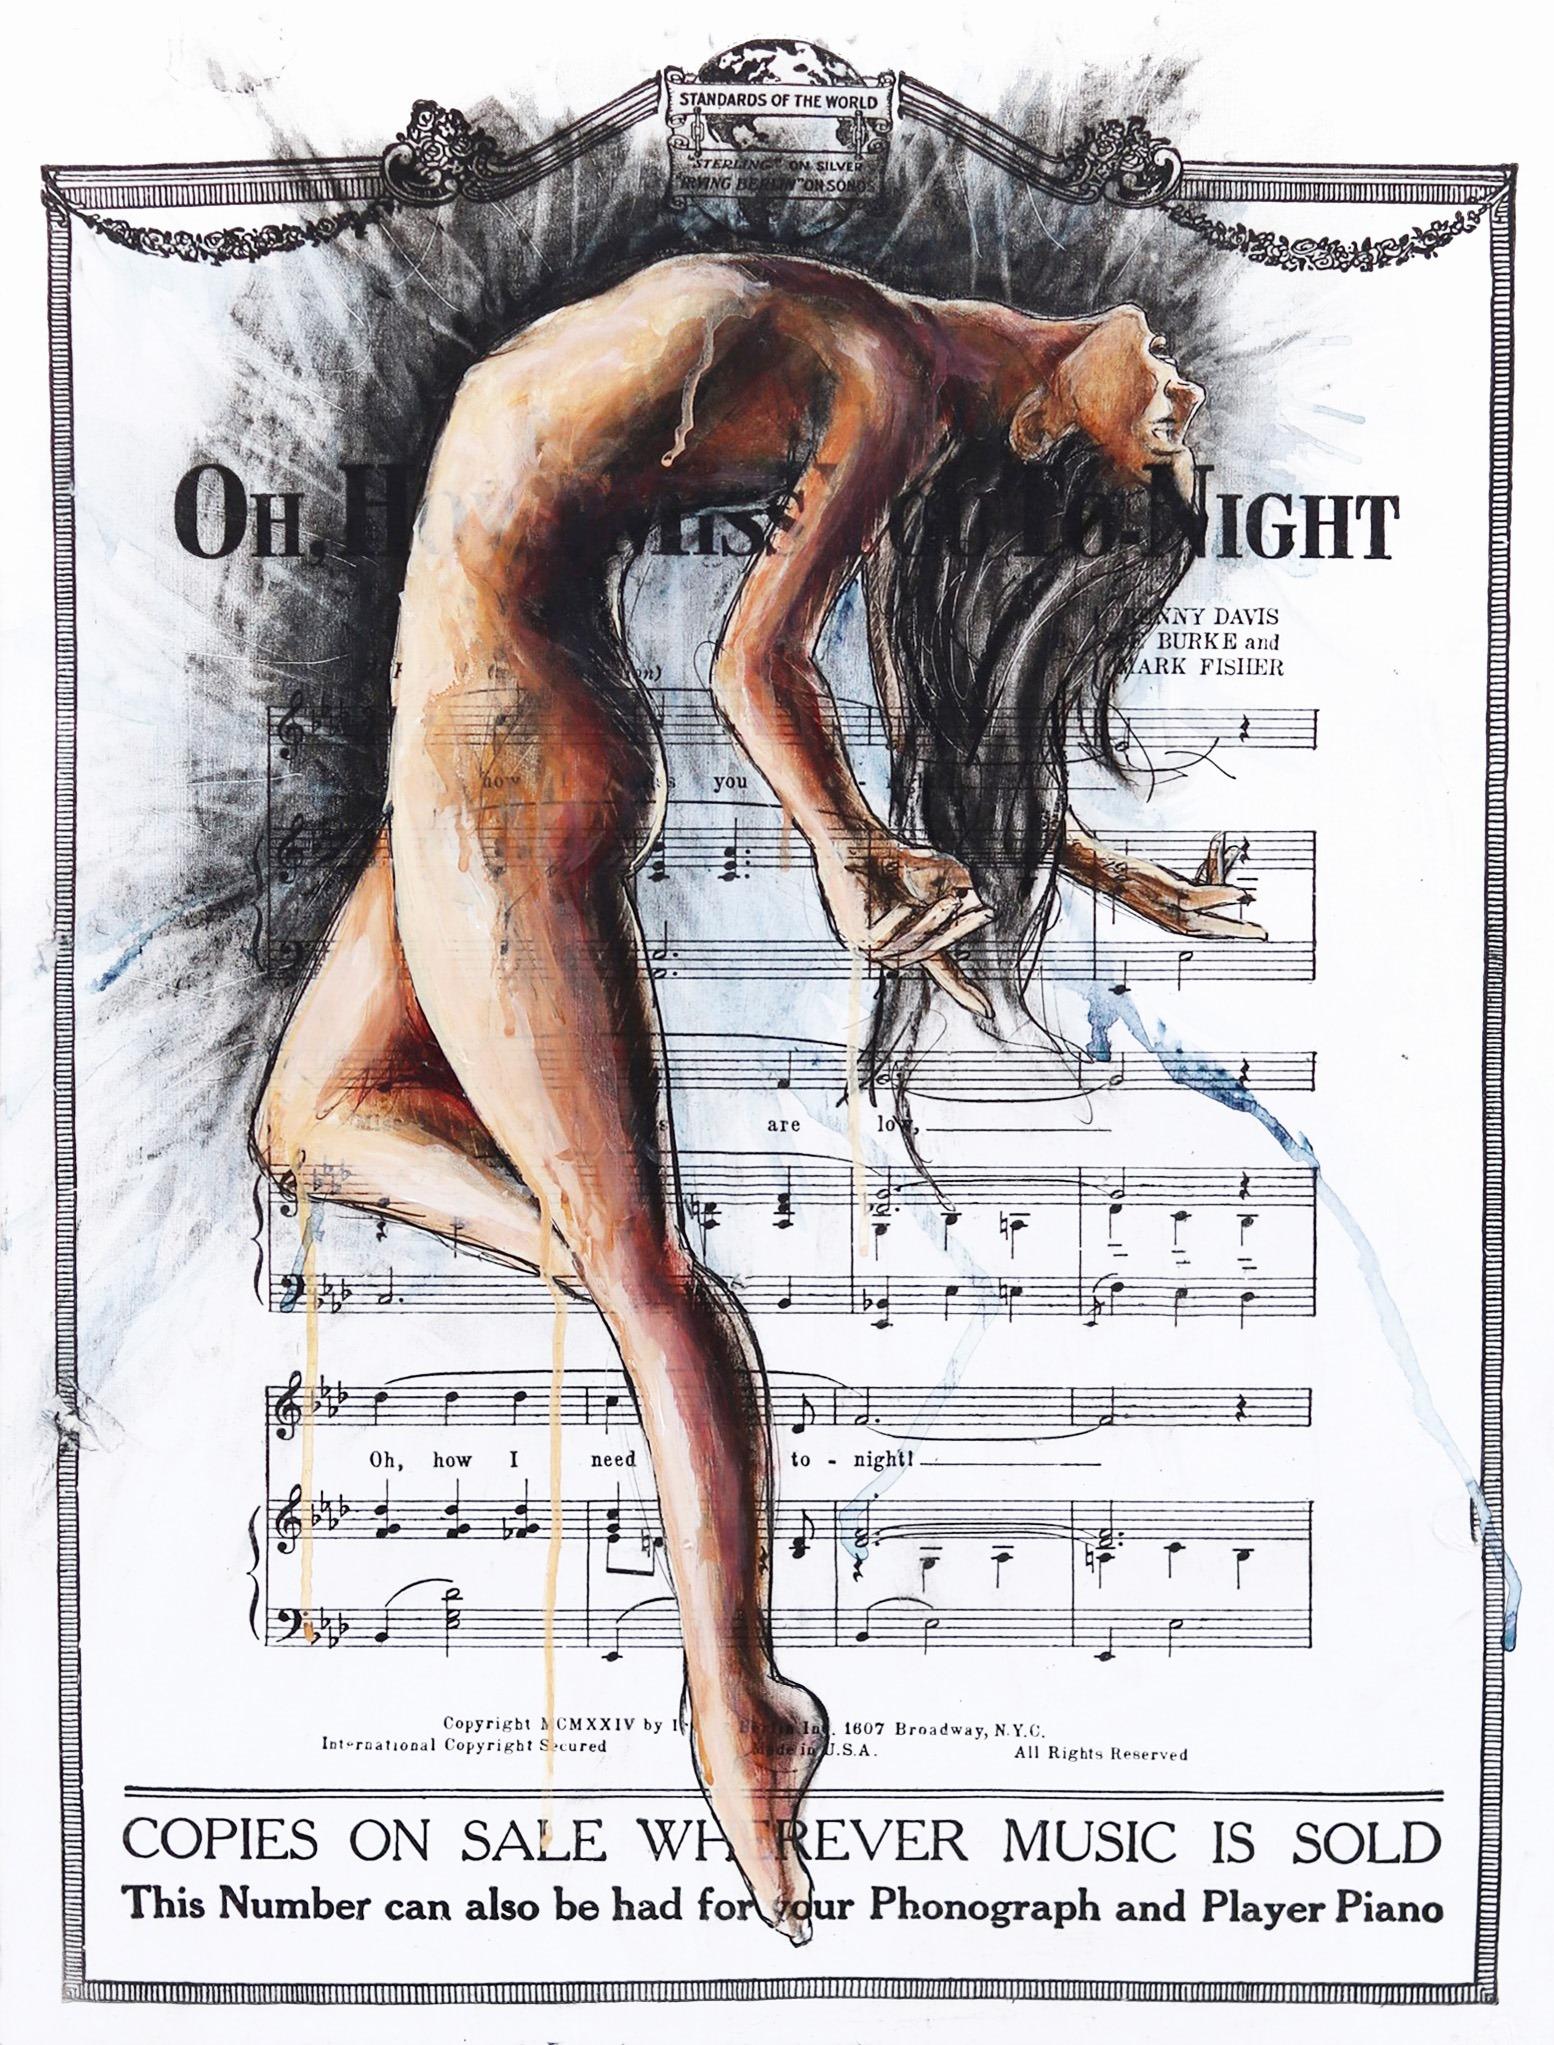 Out Of Dreams That Rose - Original Figurative Woman Charcoal Sheet Music - Mixed Media Art by Robert Lebsack